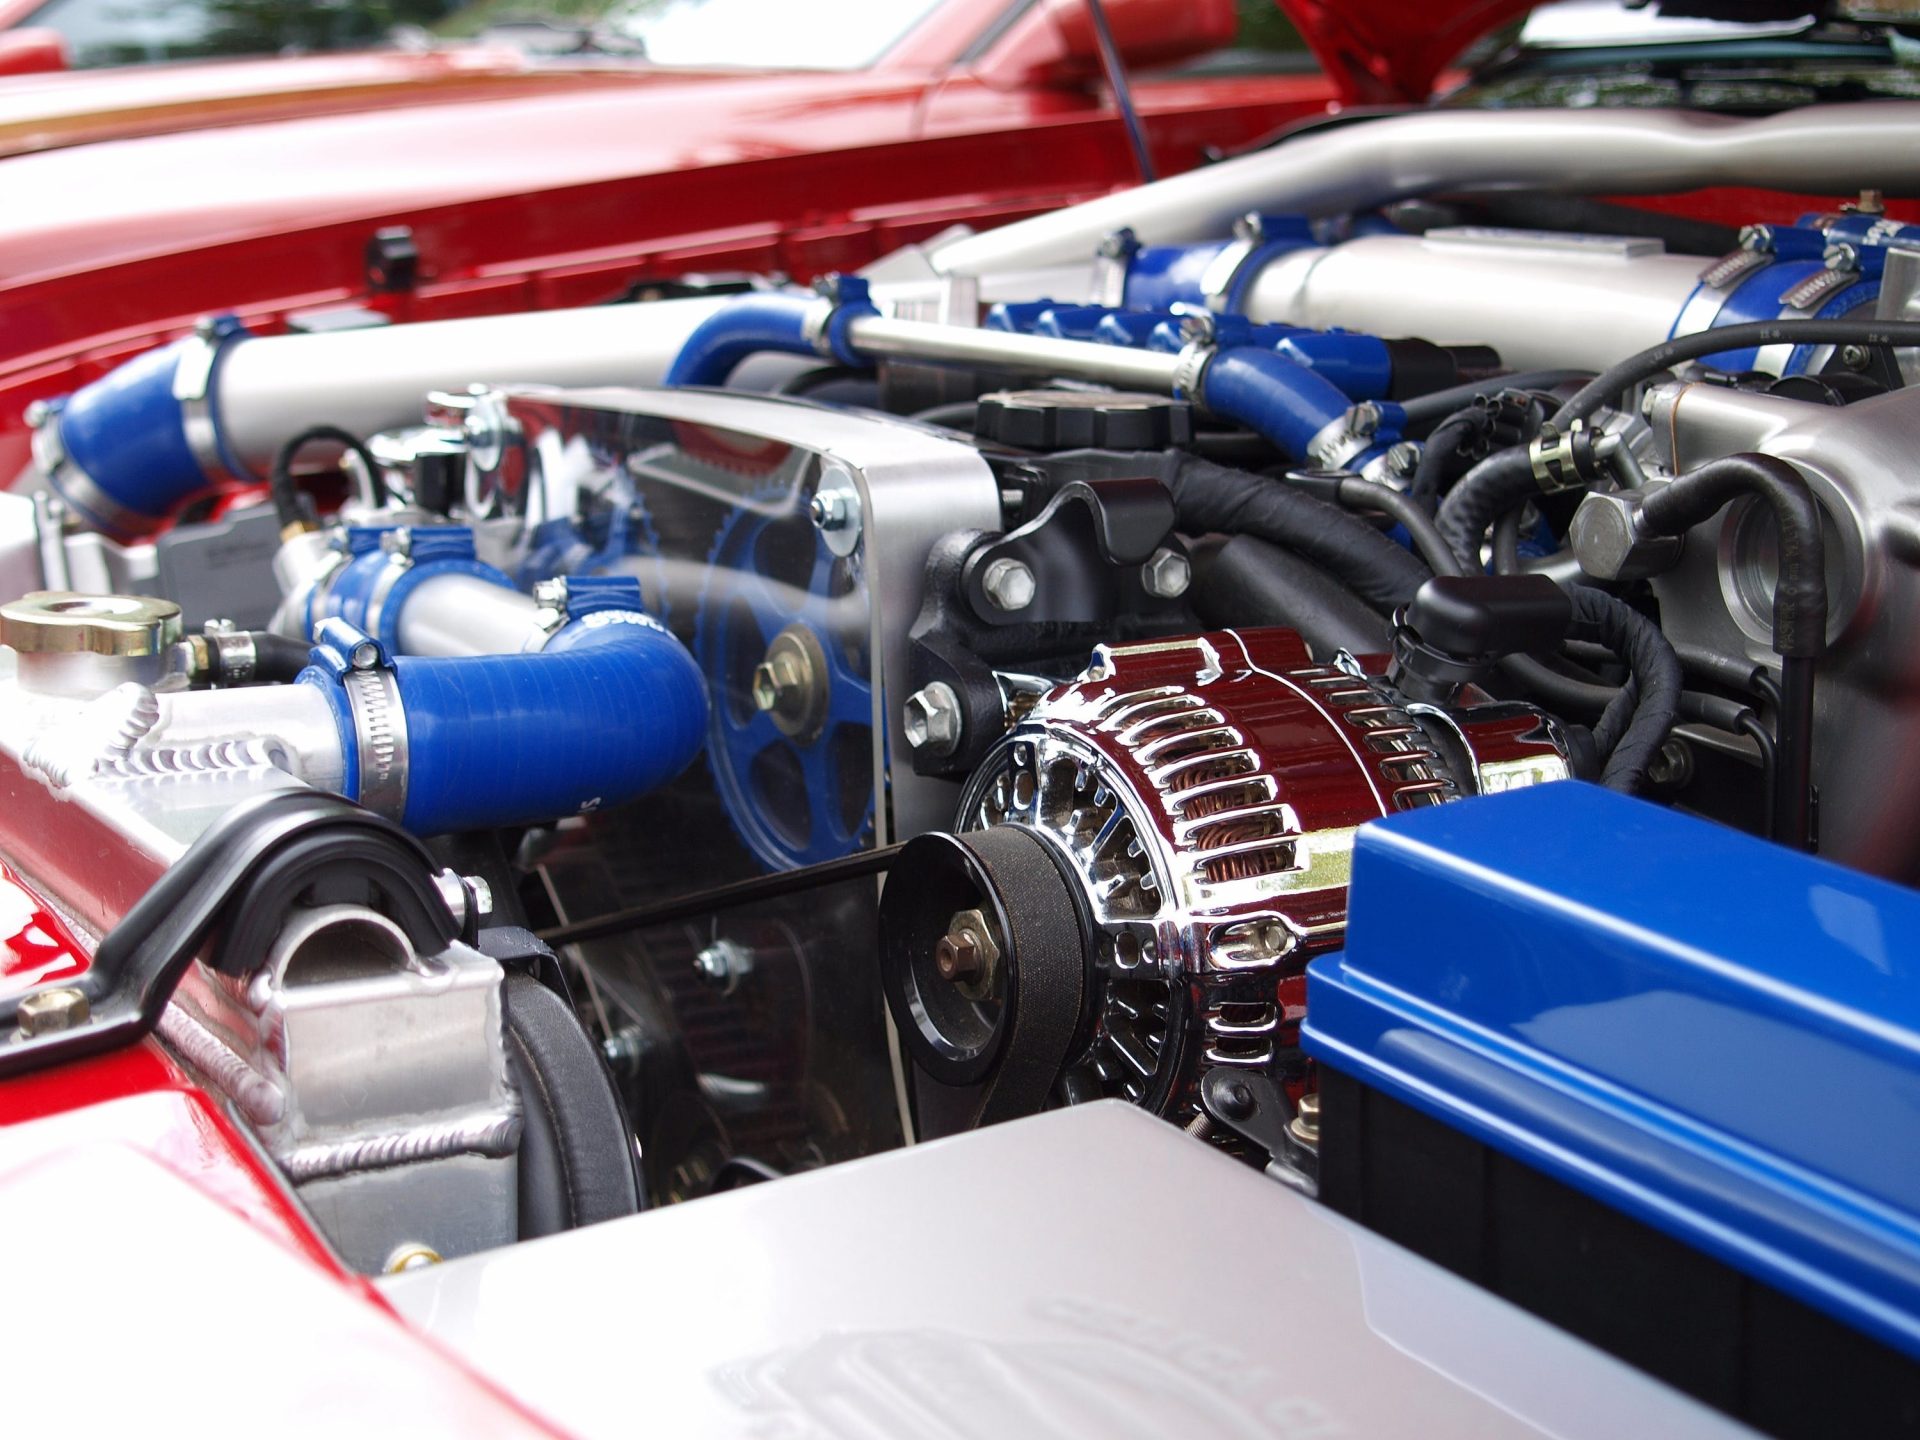 A Pioneer Auto and Non-Auto Parts Manufacturer chooses Progression Cloud for Managed SAP Hosting